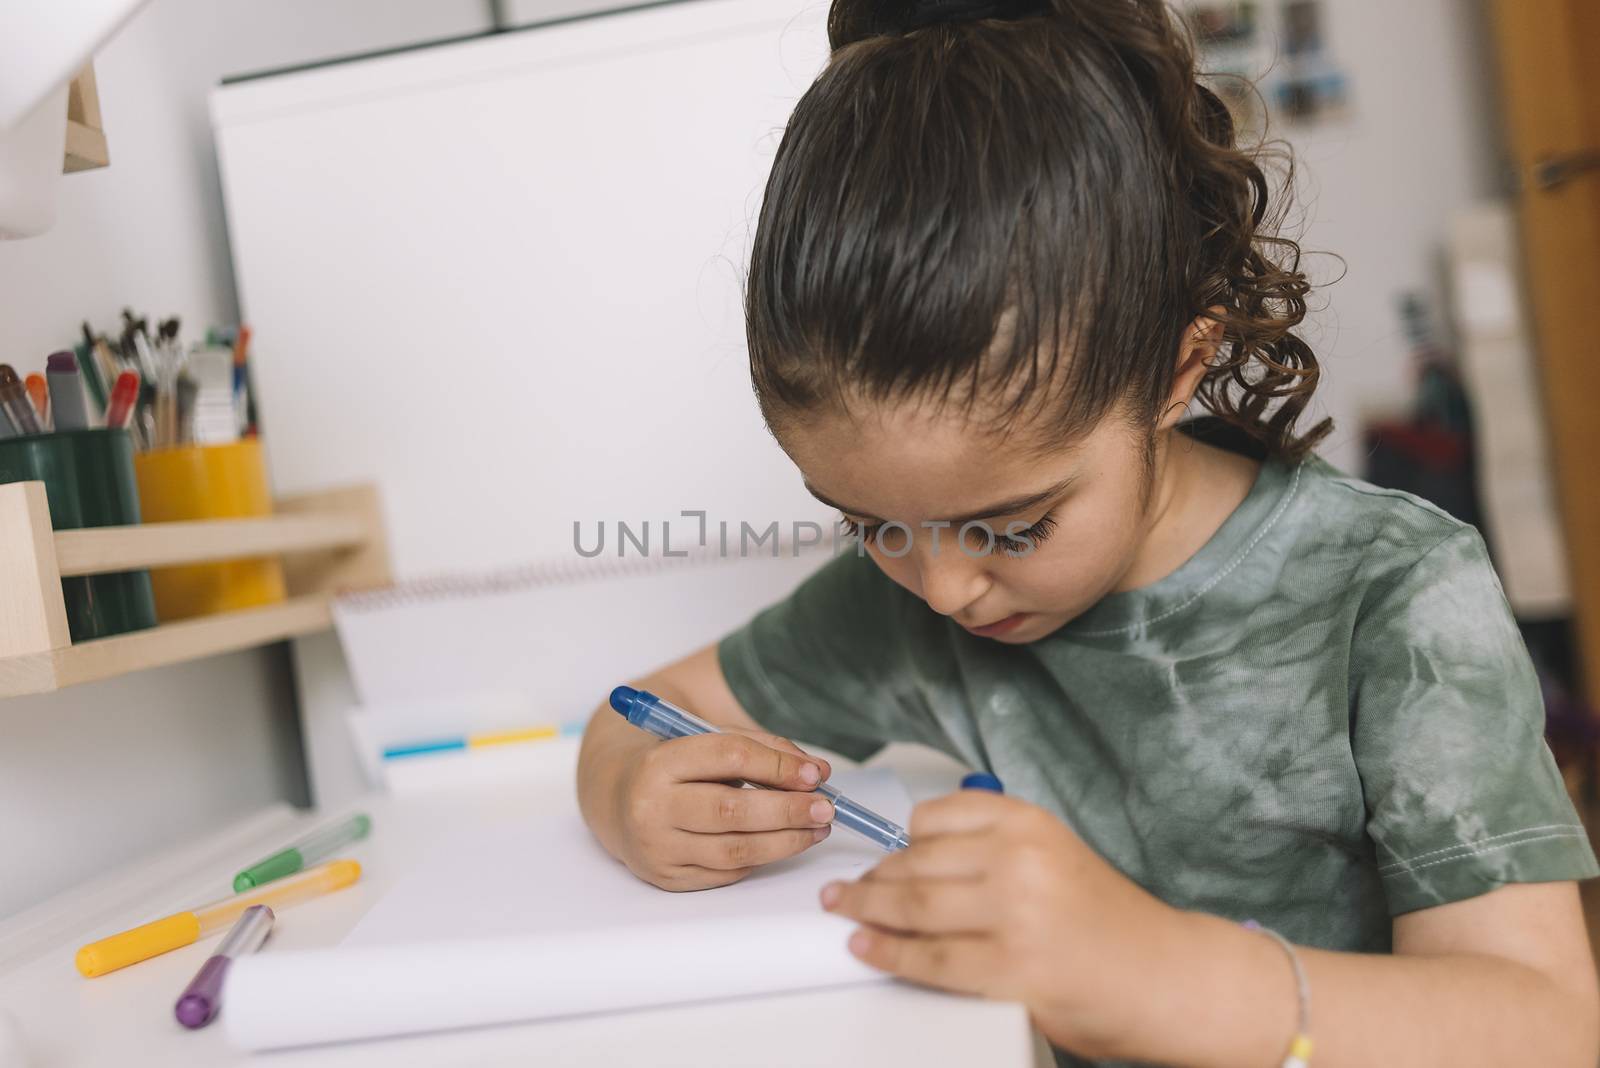 little girl draws at home with colored markers, she is drawing on the desk in her room